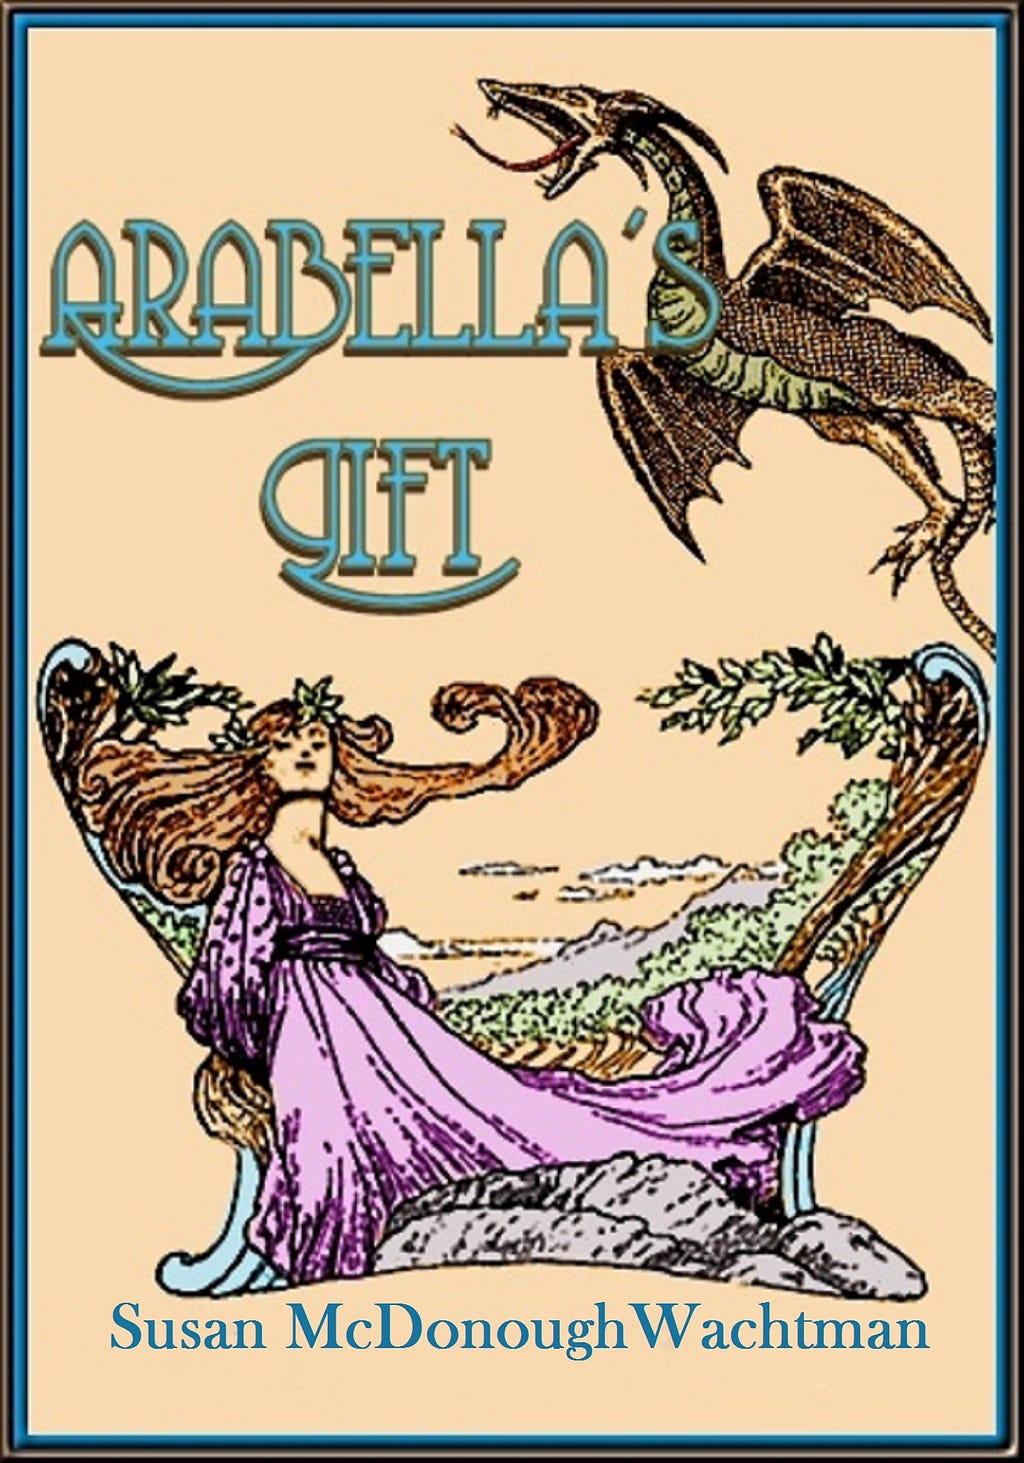 A lovely artwork showing a young woman in a violet dress and a dragon flying over her with the title Arabella’s Gift in cursive script.